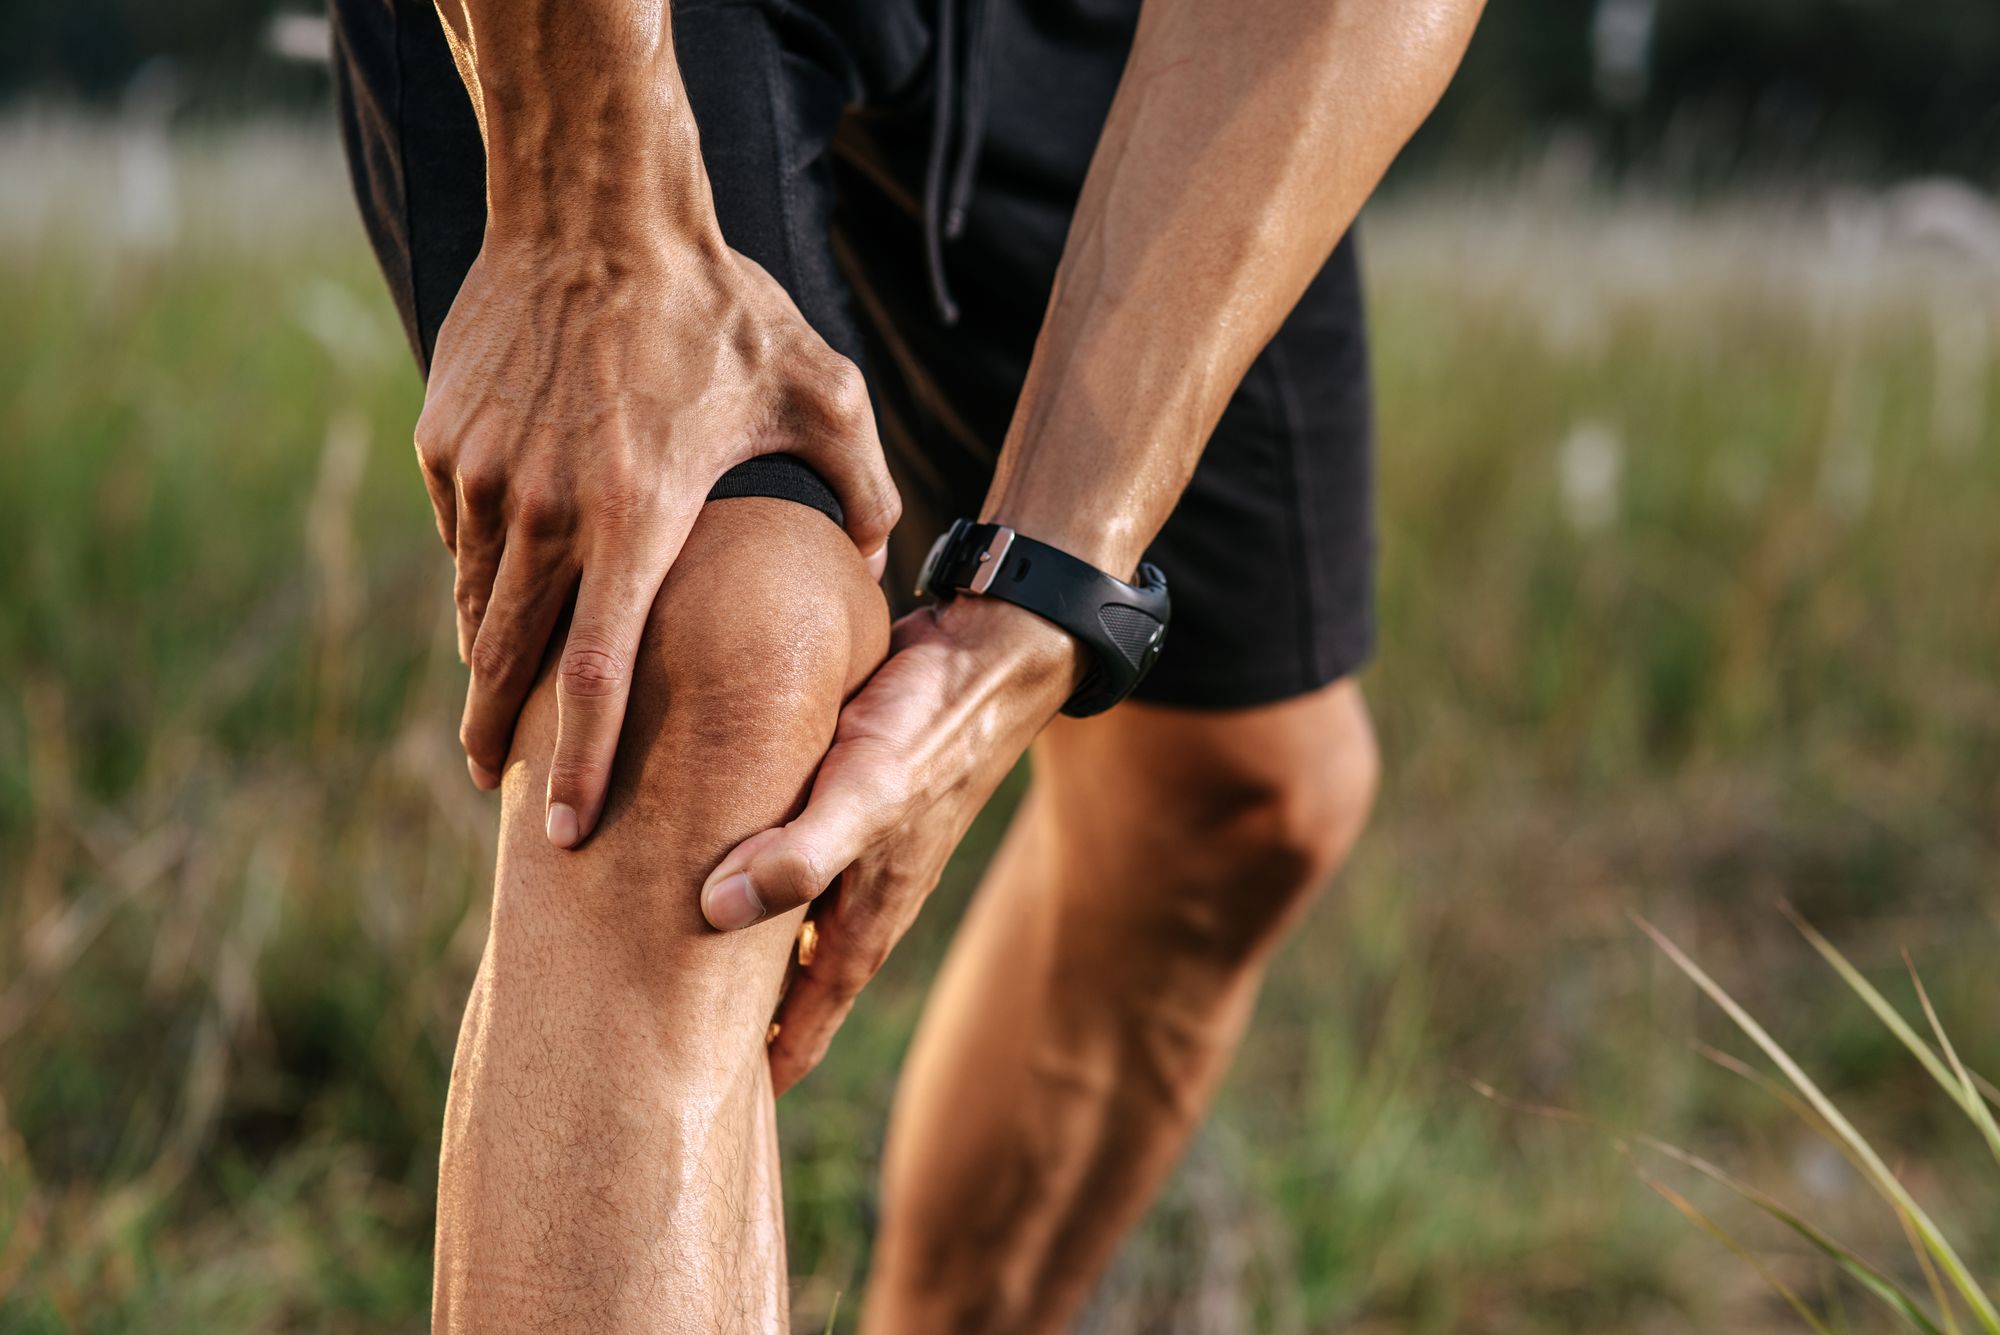 Common Knee Pain Causes, Treatments & Getting Relief